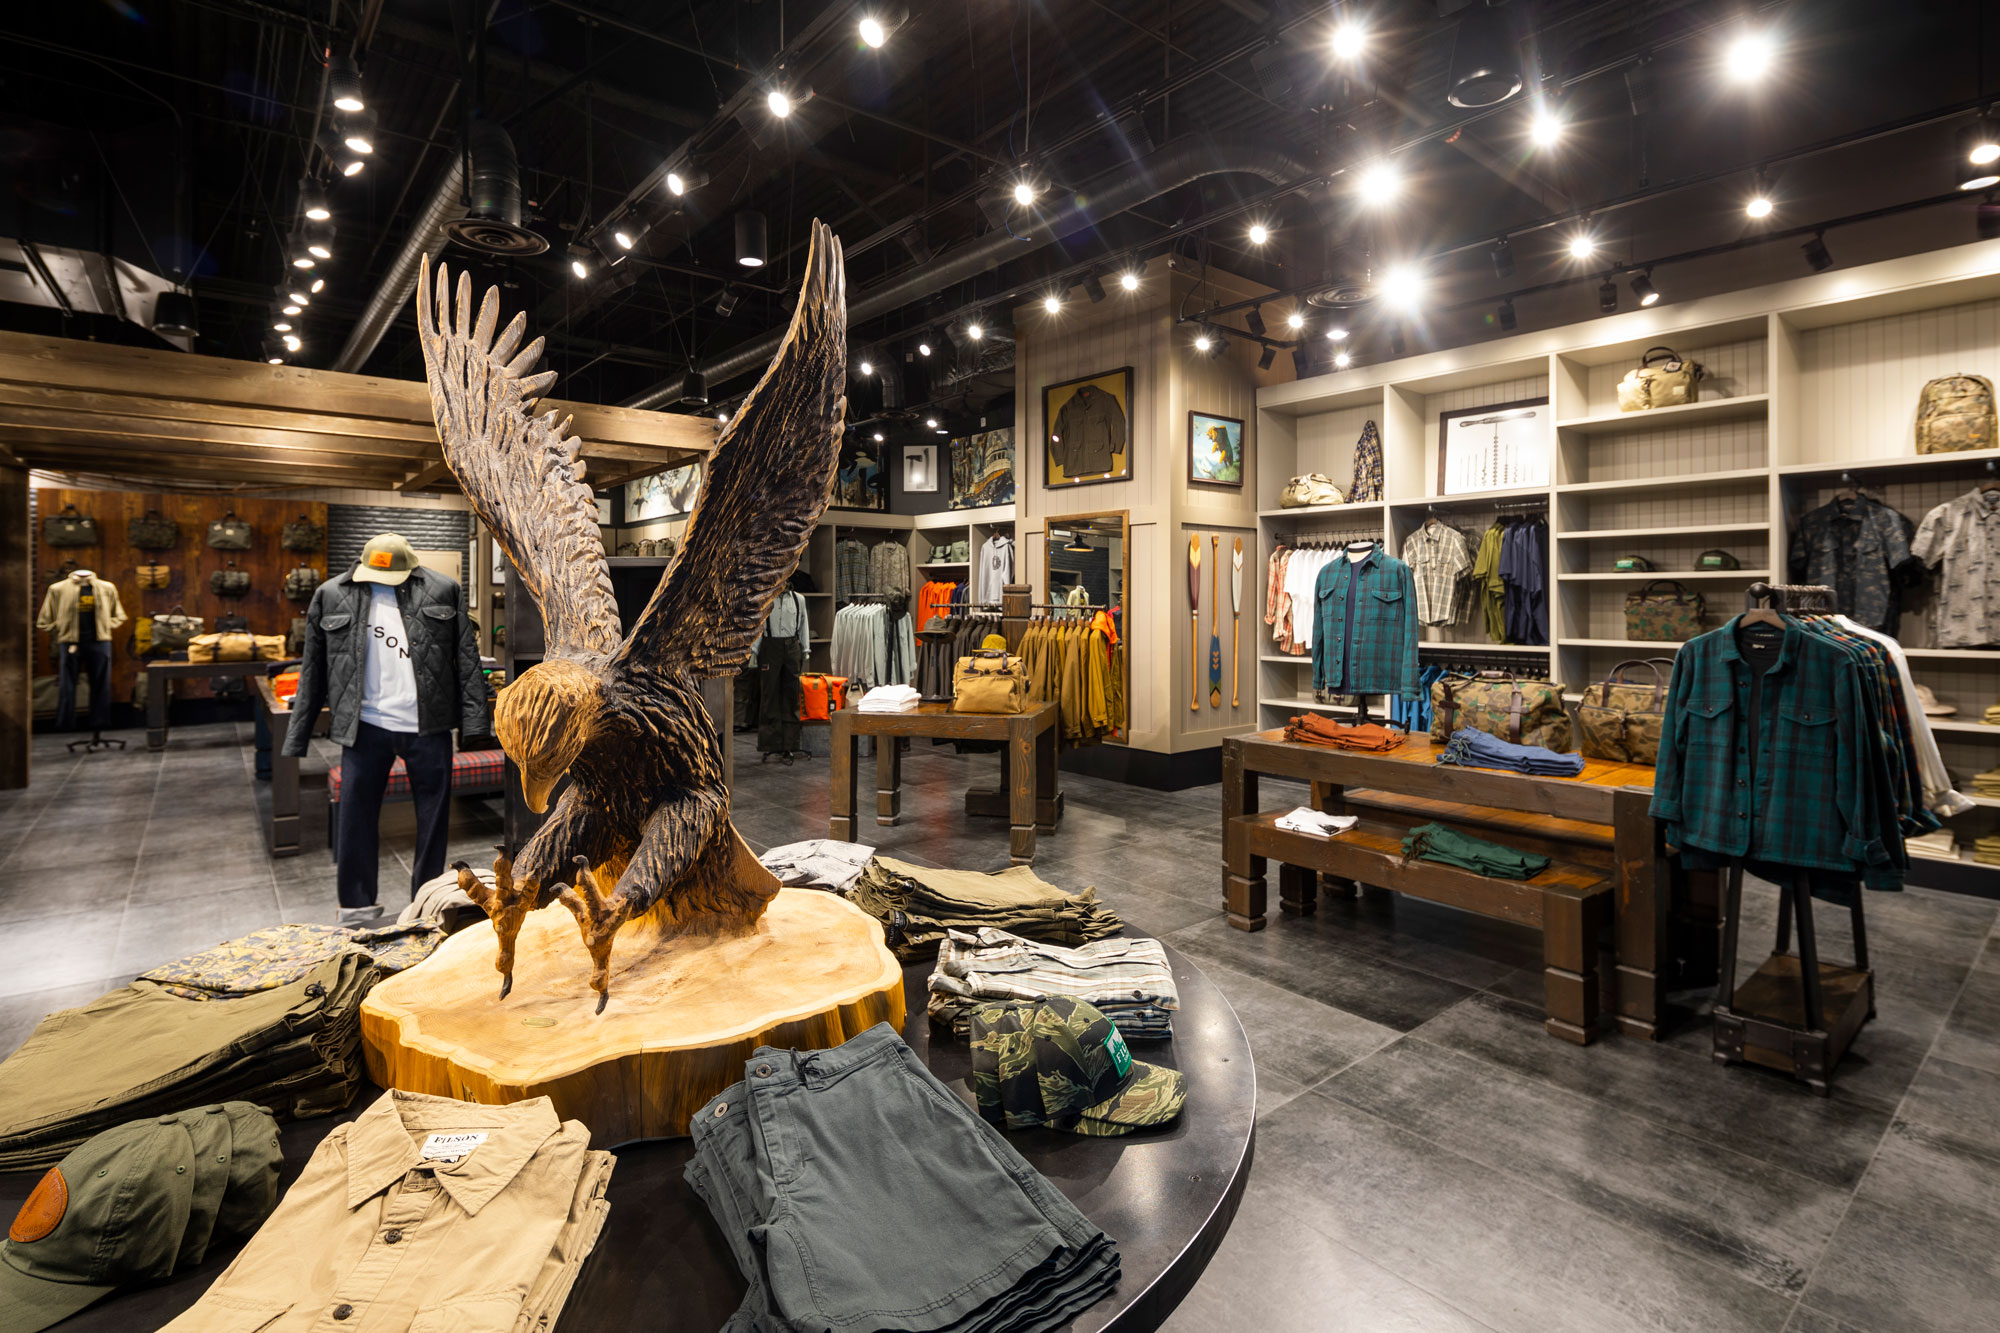 Filson interior with various merchandise and eagle sculpture